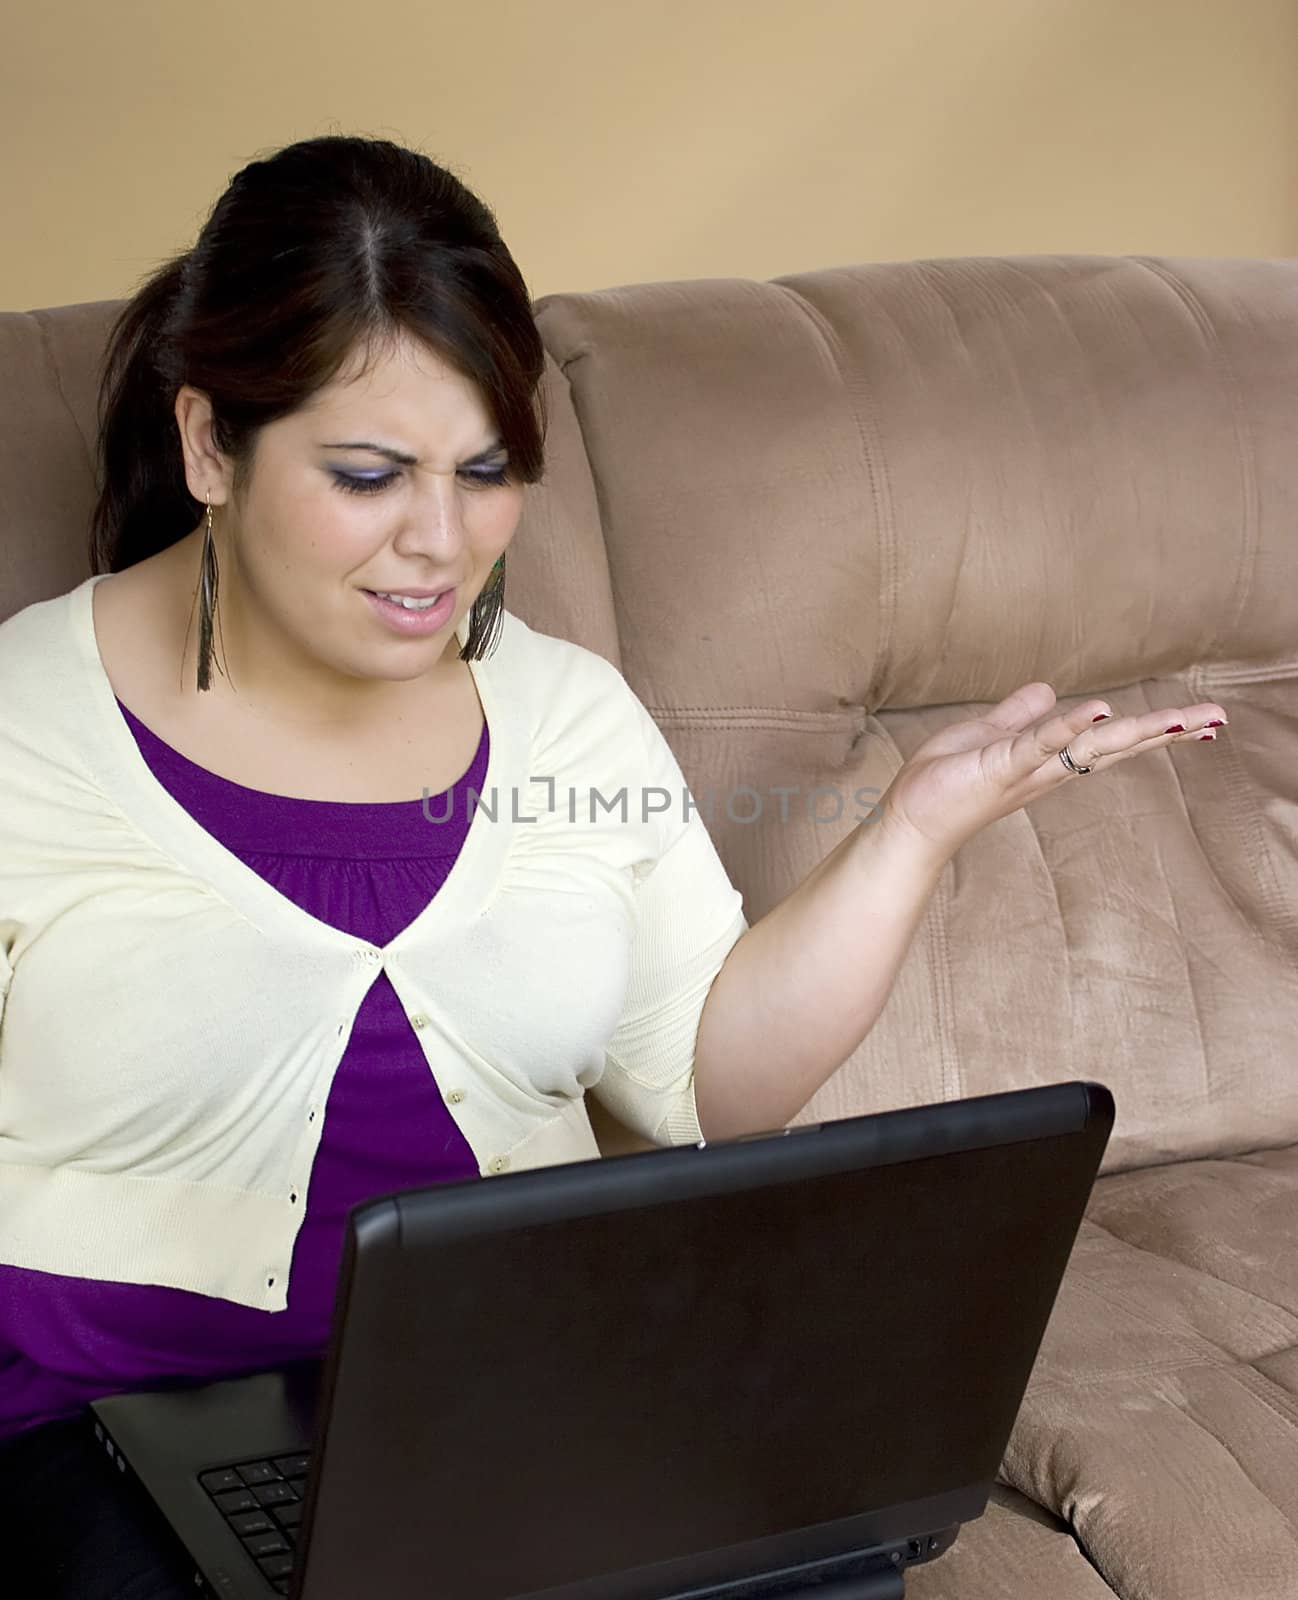 An attractive young woman working on her laptop at home.